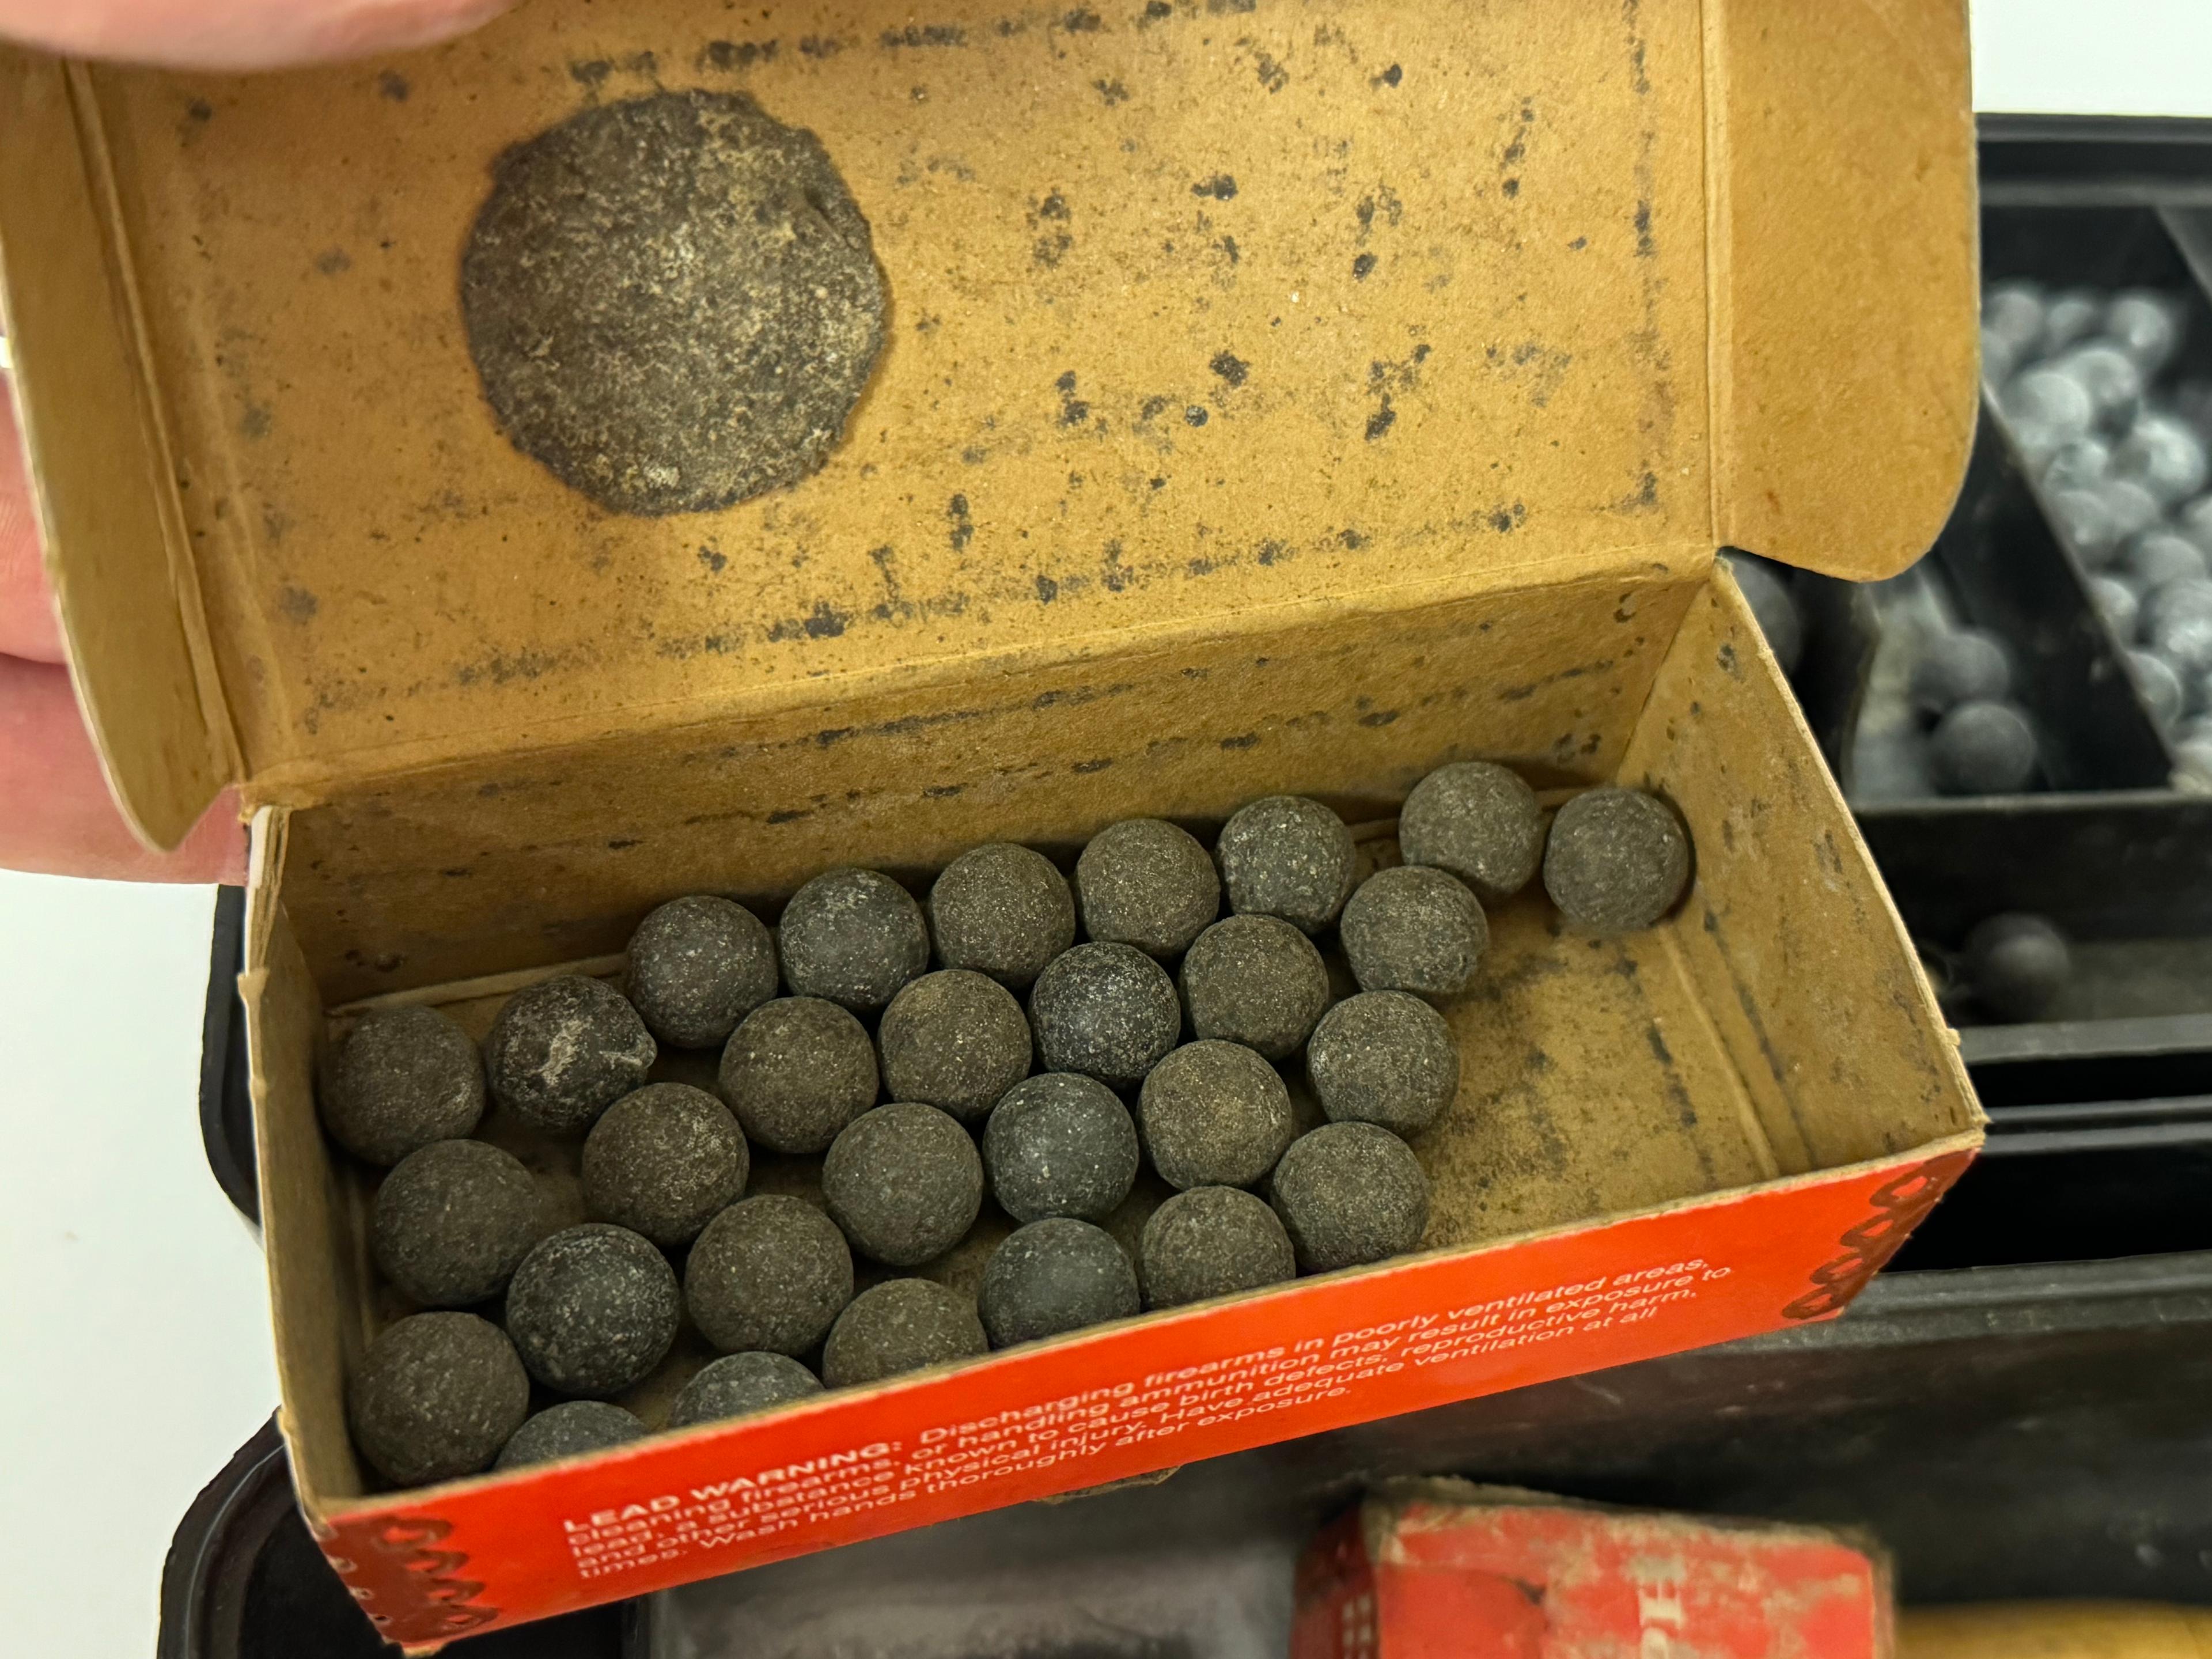 Tackle Box Full of Muzzle Loading Balls and Accessories 